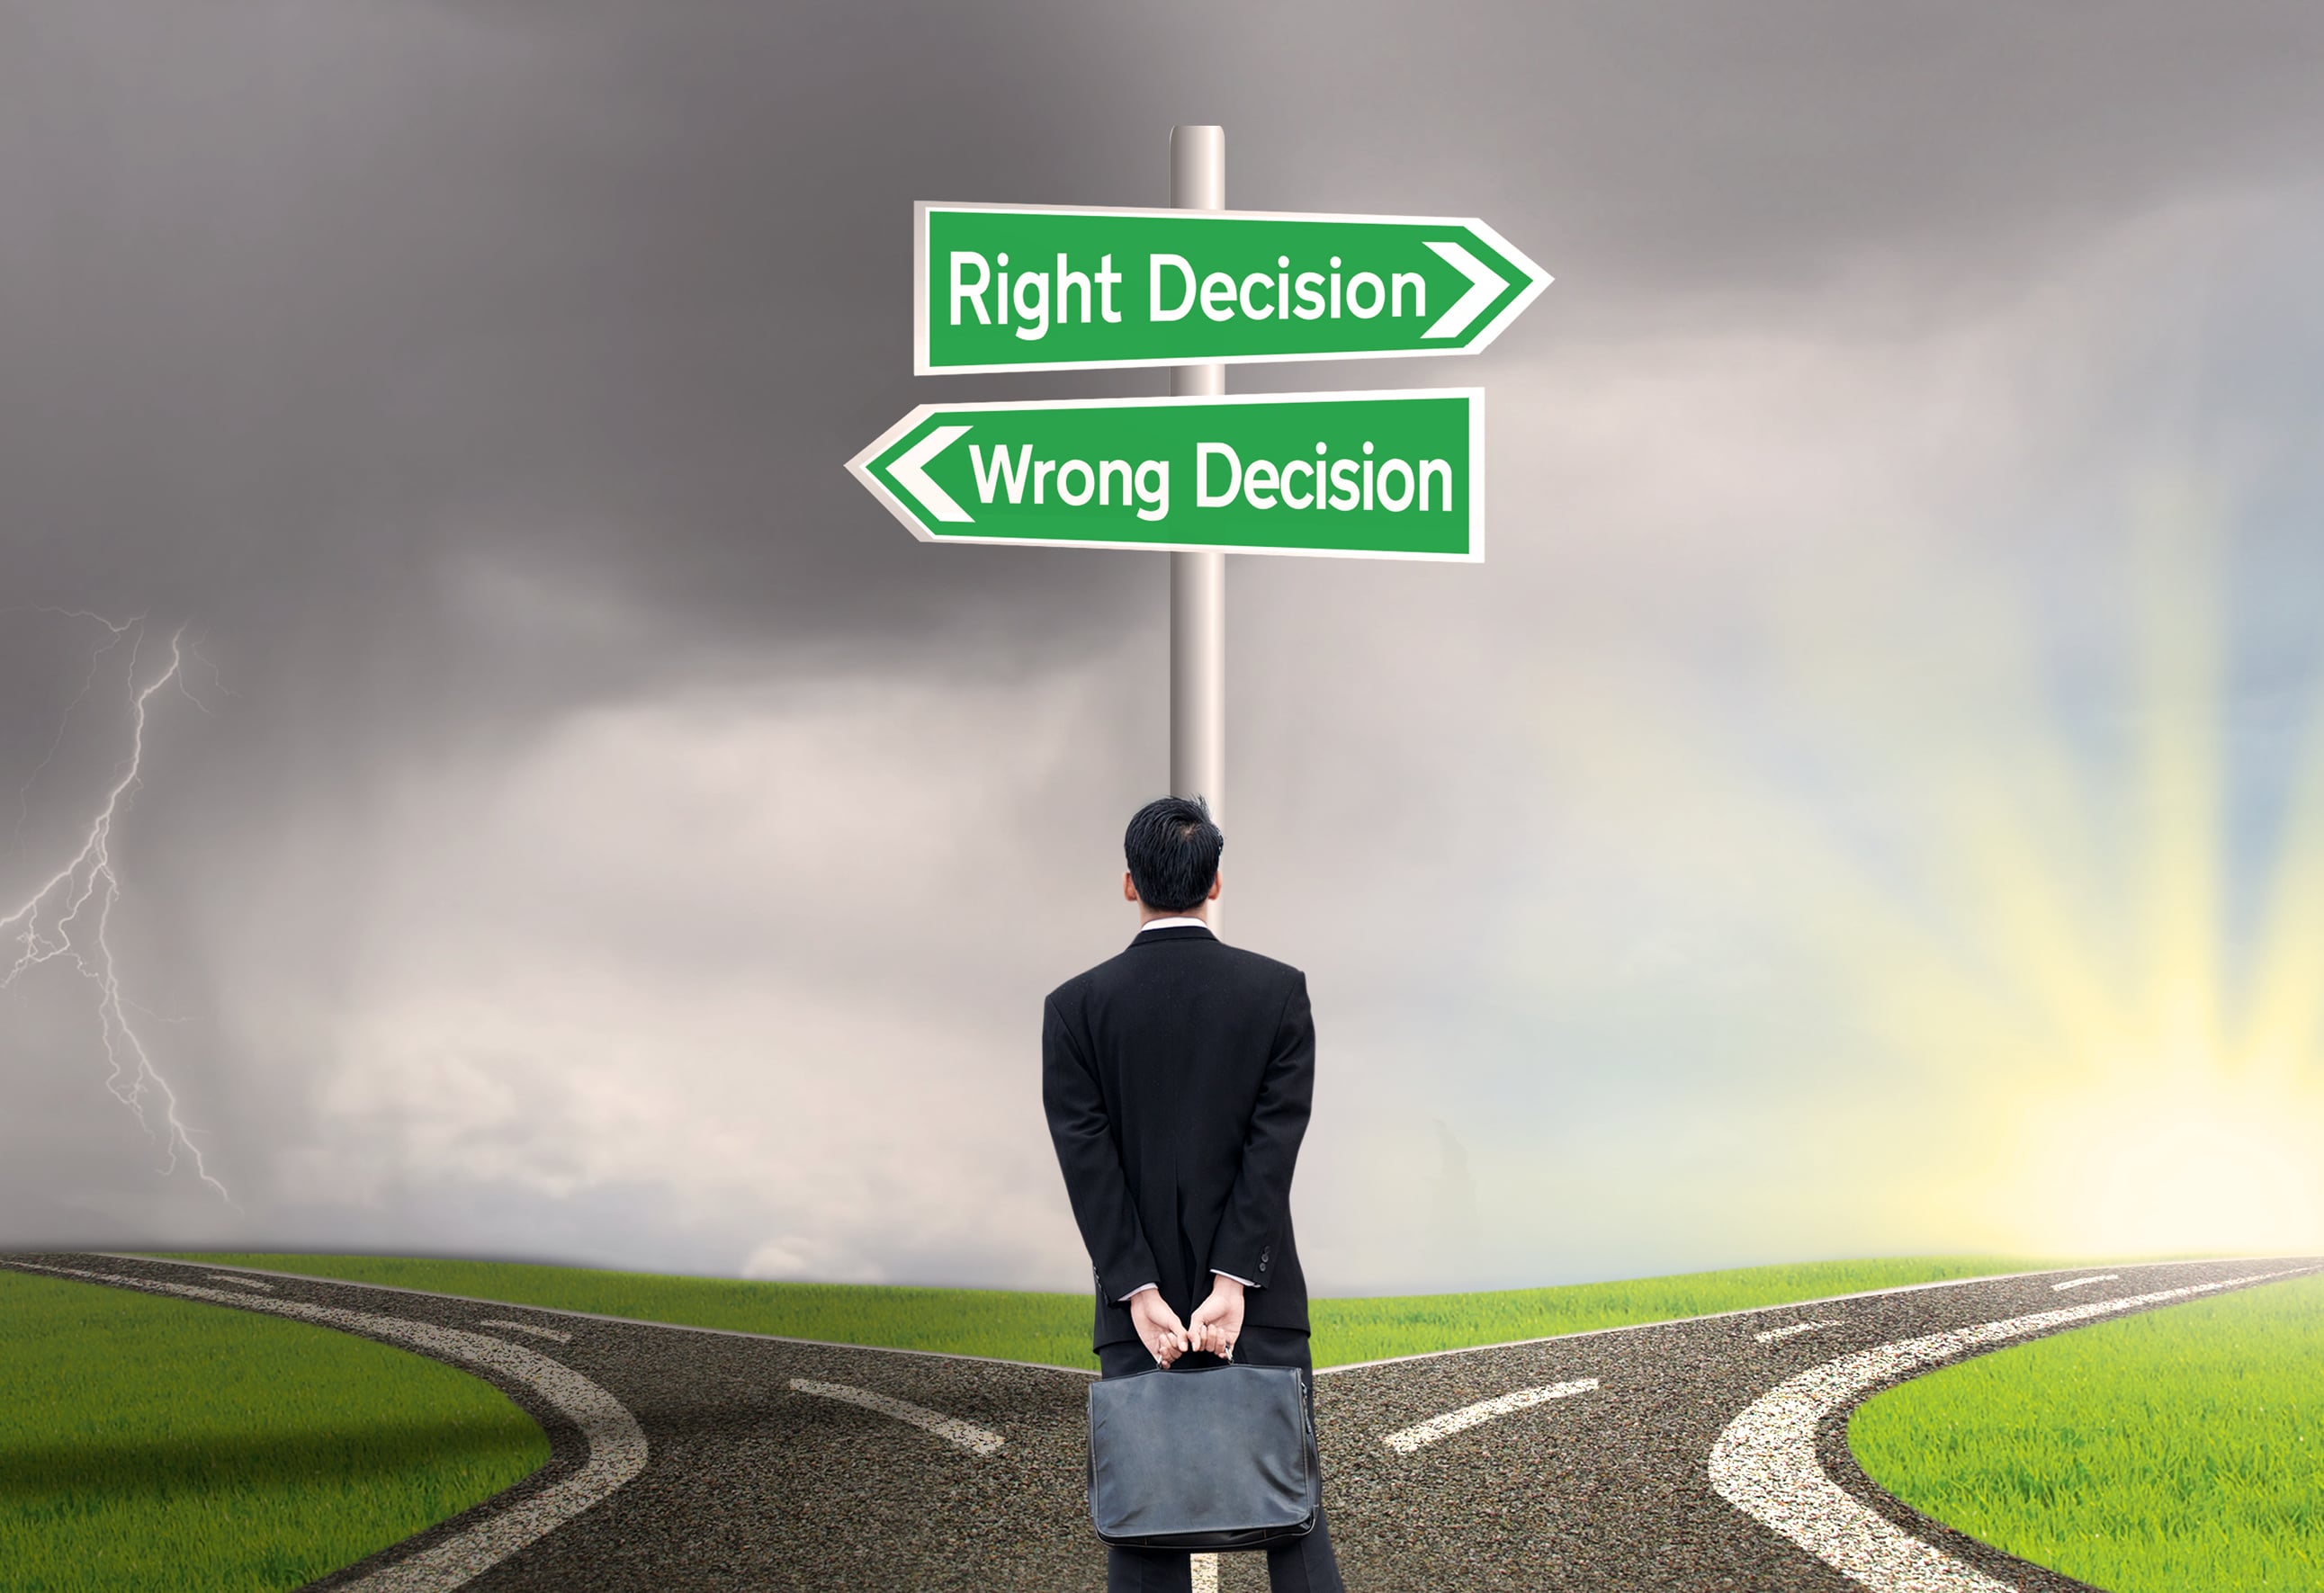 graphic of man standing at crossroads with a Right Decision sign and Wrong Decision sign